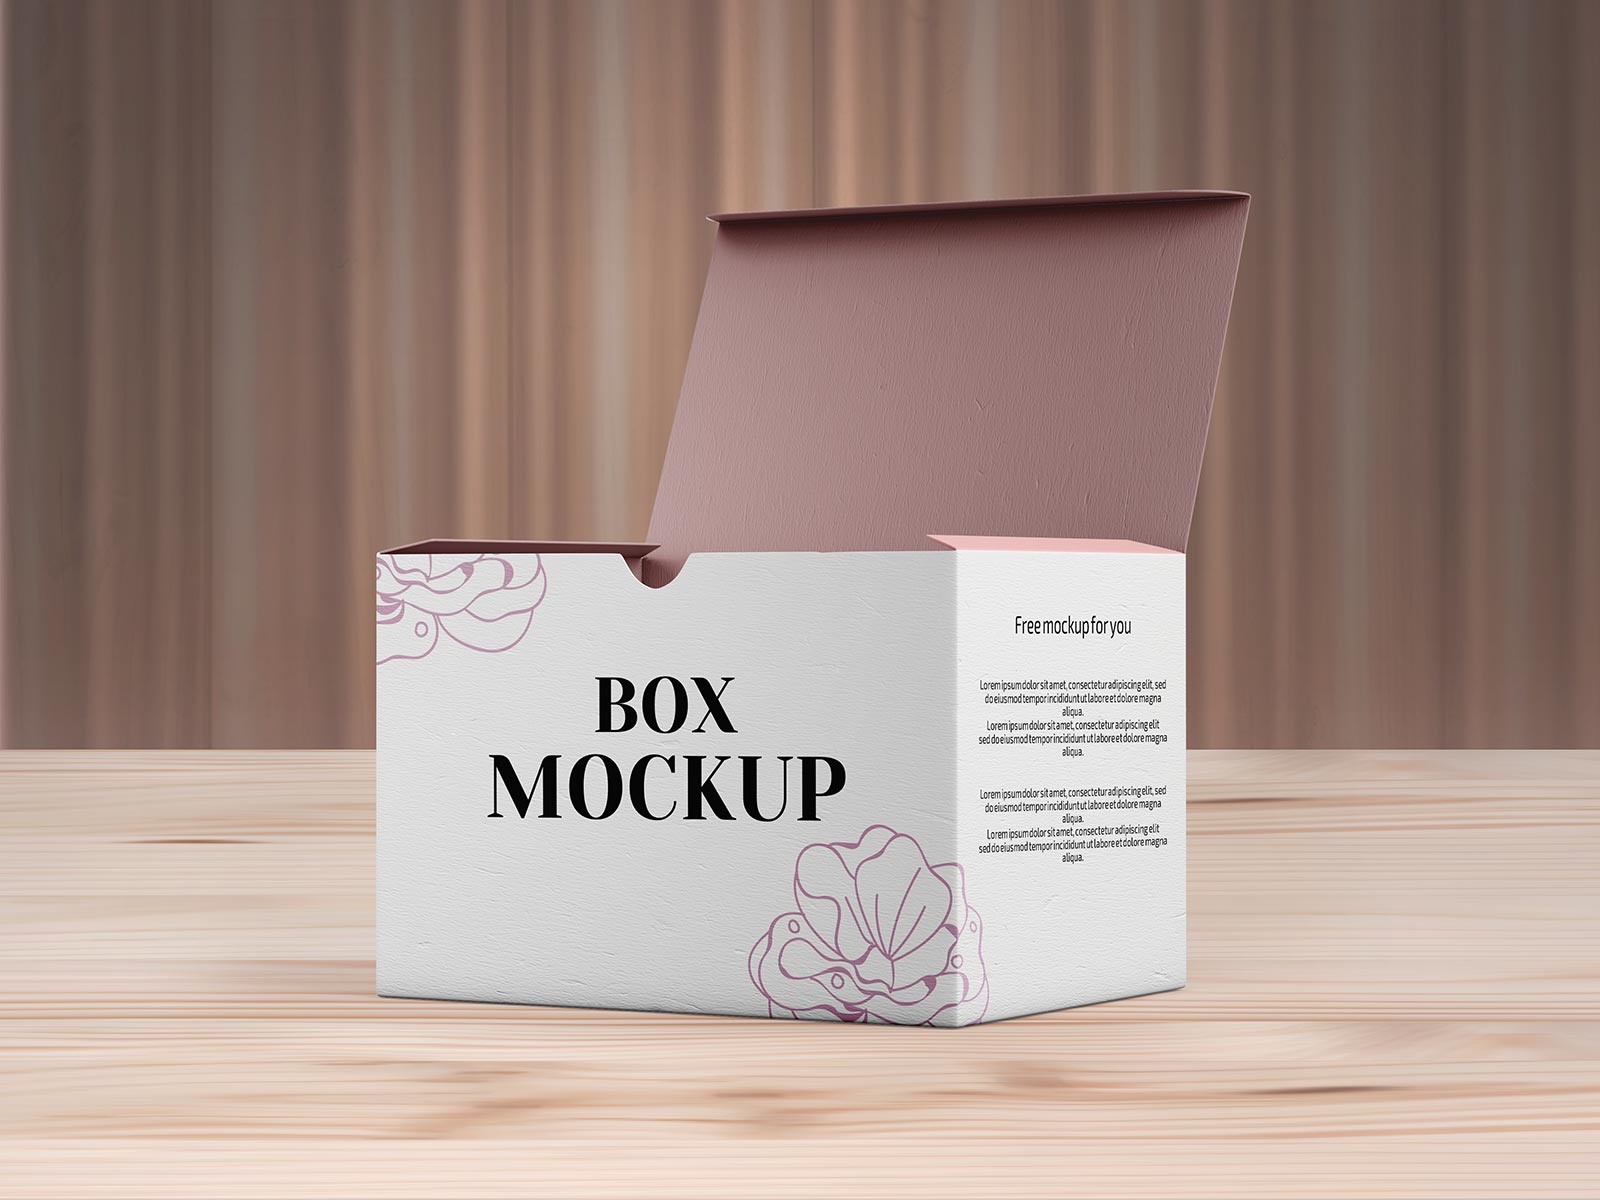 plastic cup mockup psd free Card business mockup plastic translucent cards psd transparent template mock trends classic